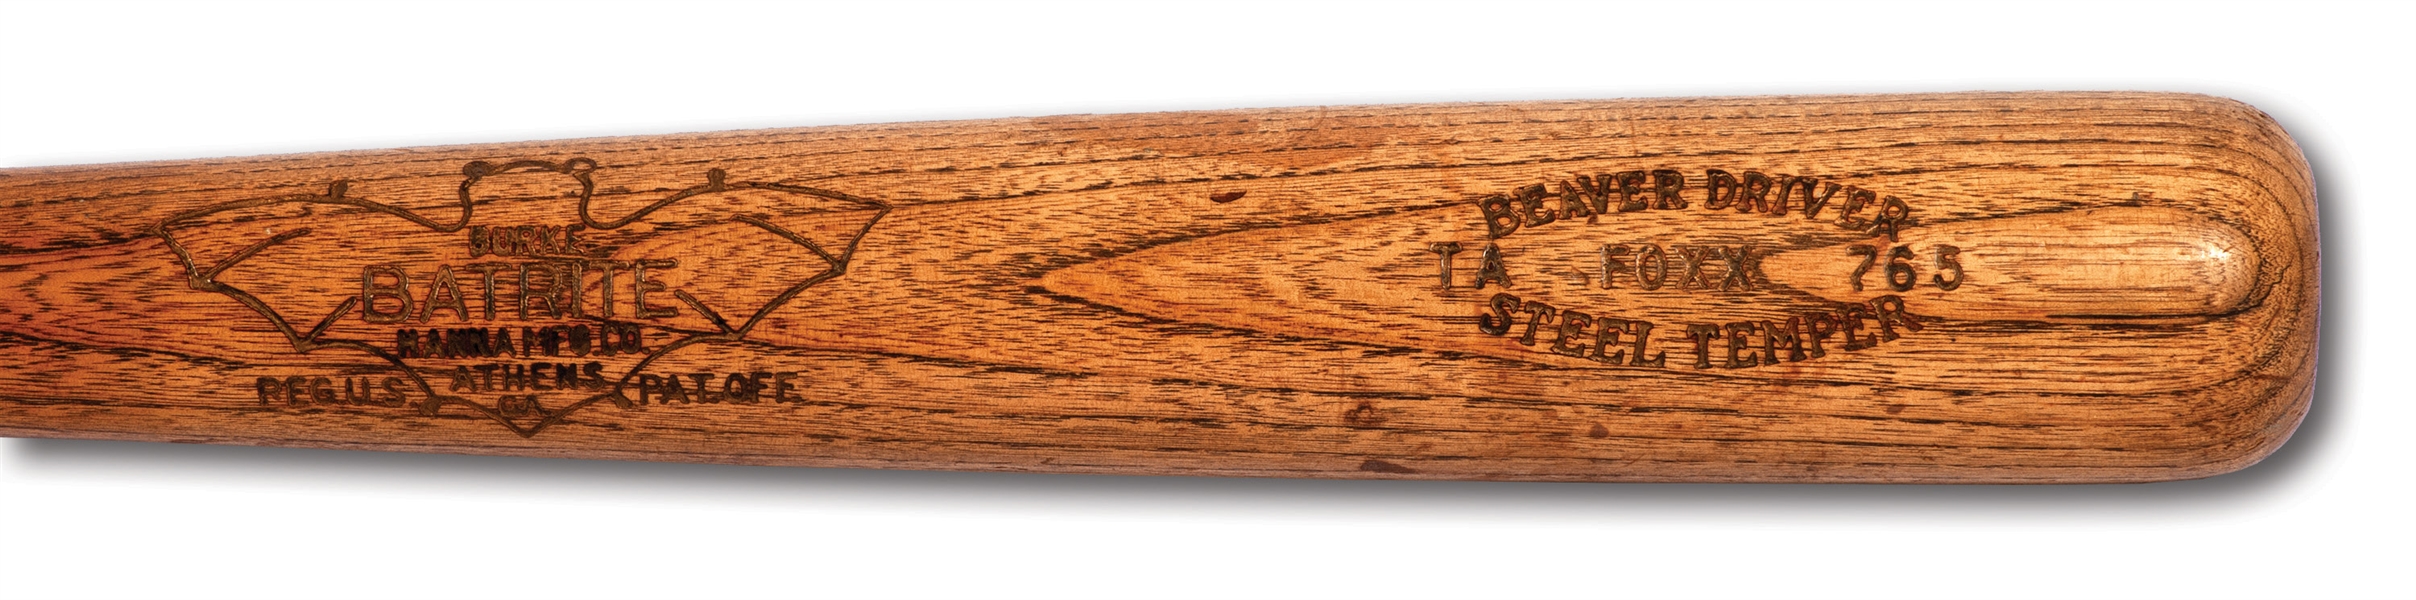 C. EARLY 1930S JIMMIE FOXX HANNA BATRITE PROFESSIONAL MODEL BAT IN OUTSTANDING CONDITION